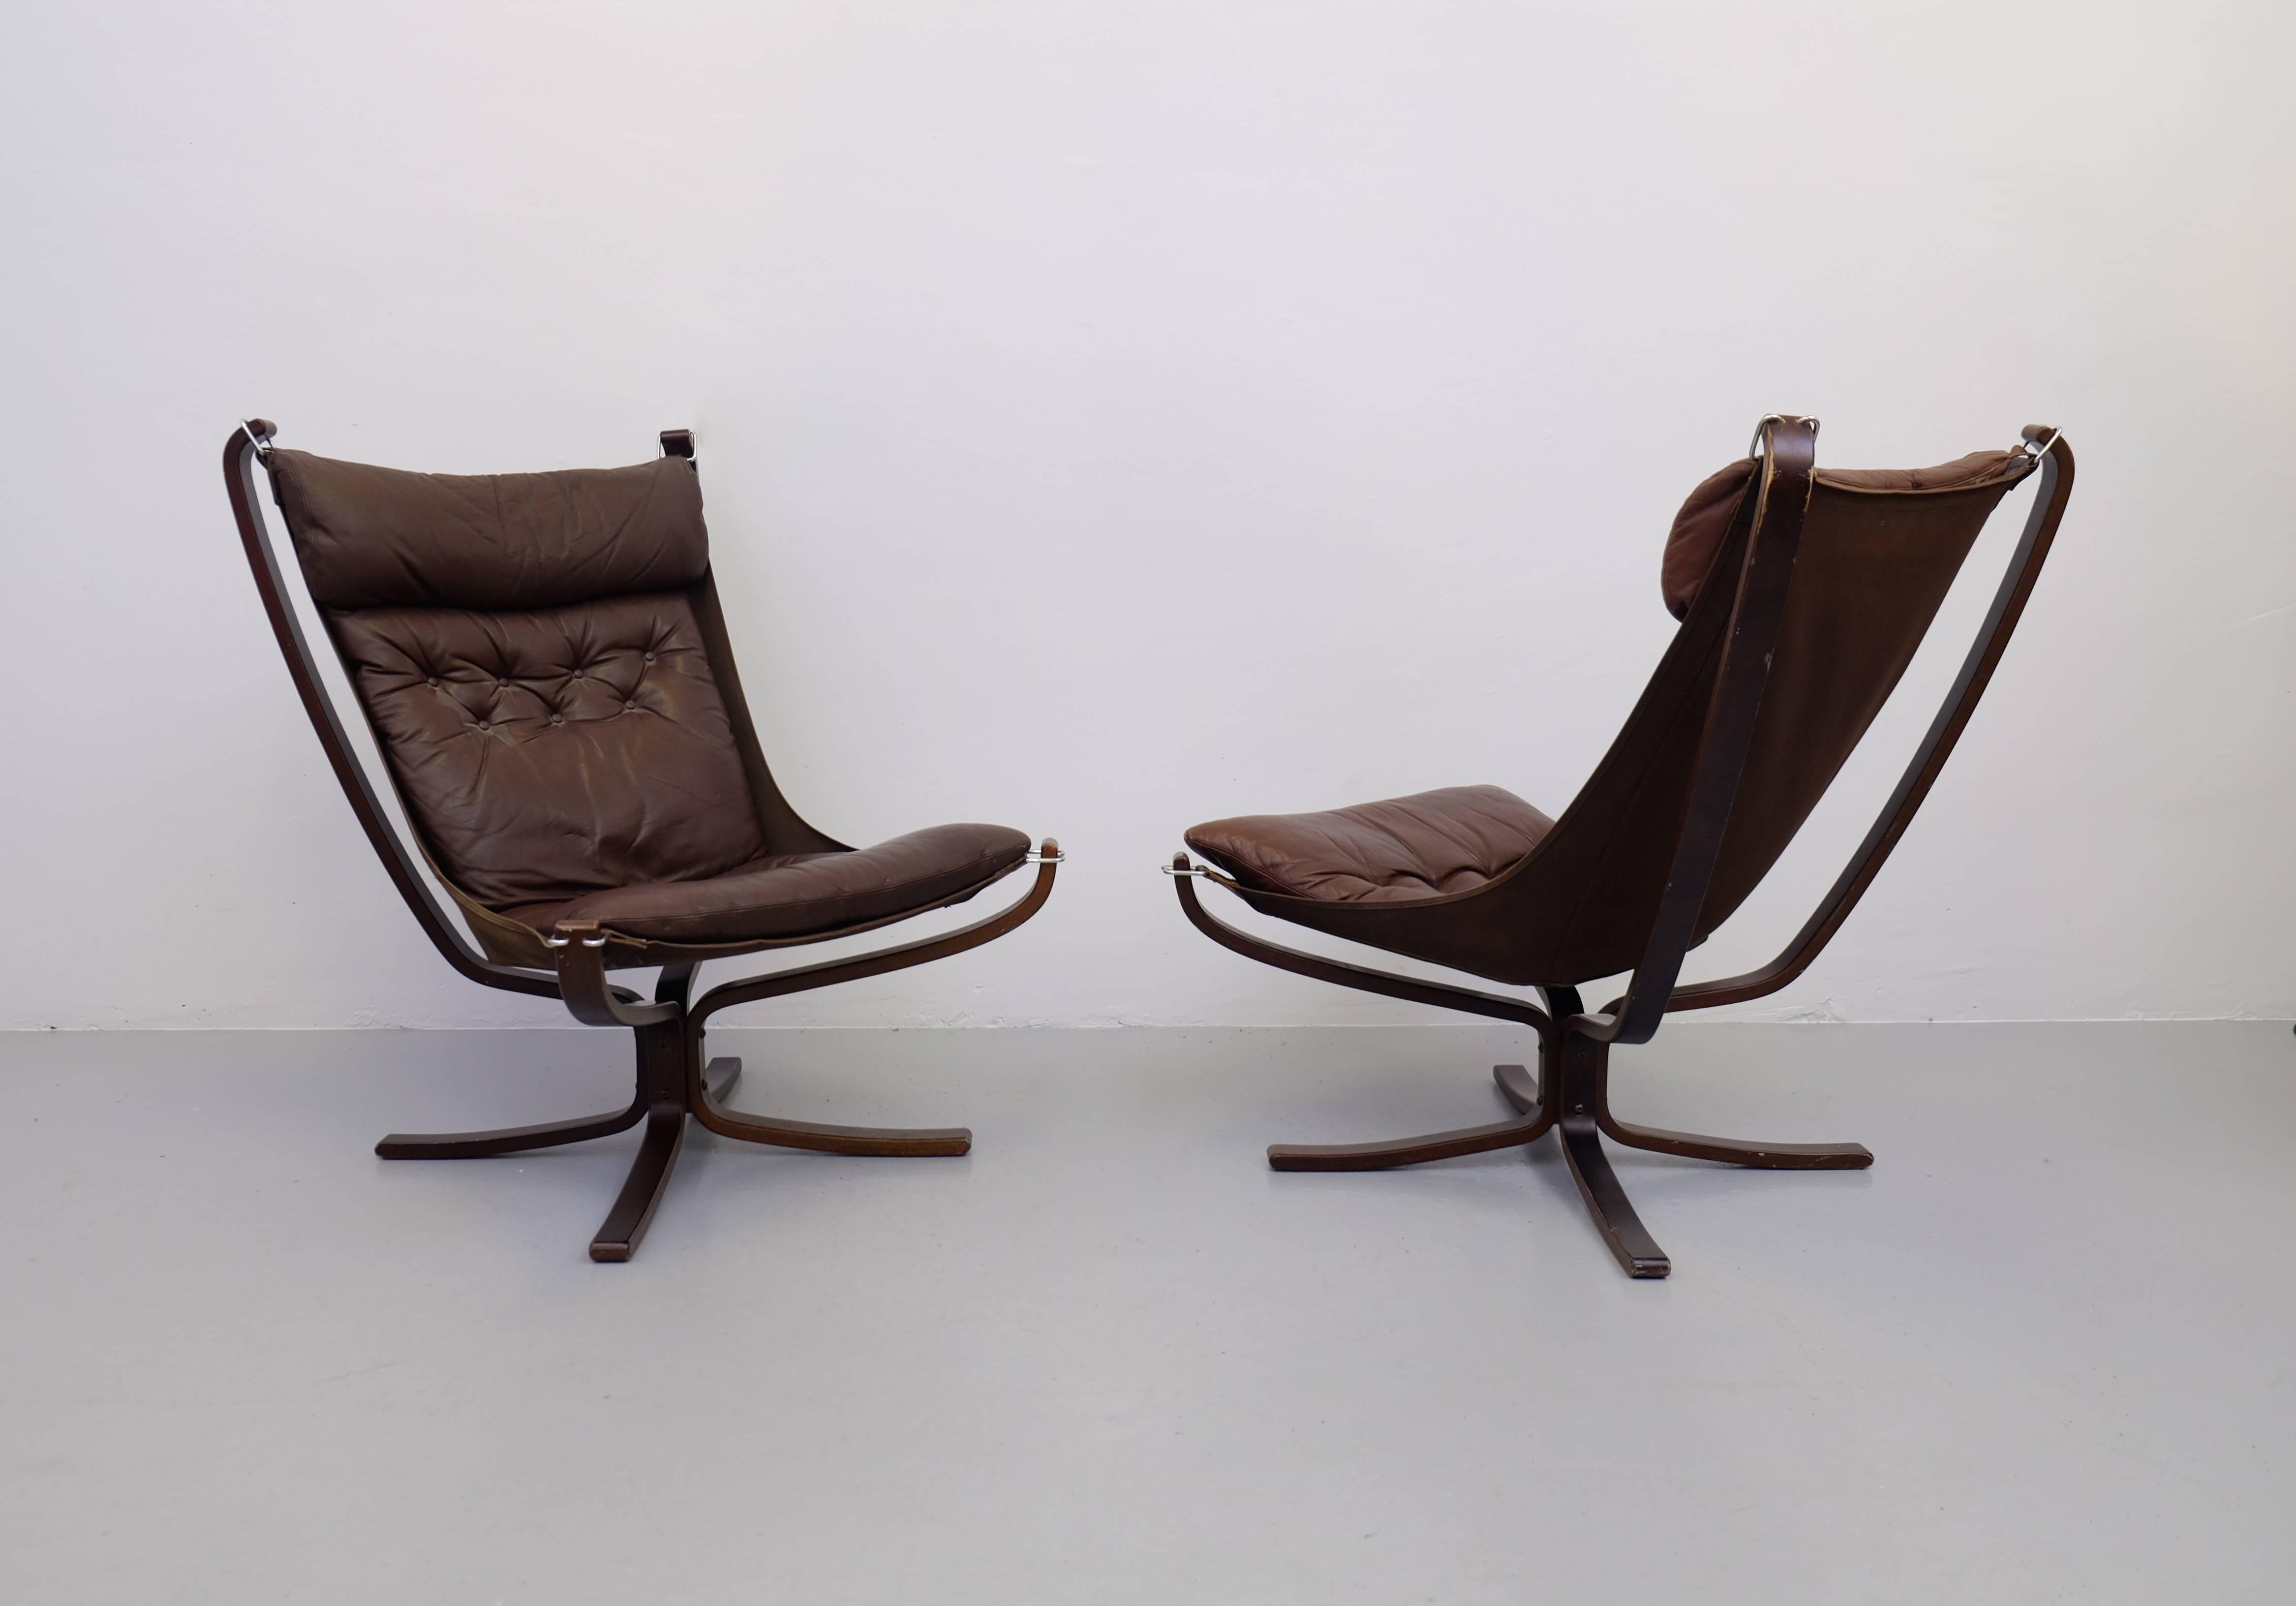 A super comfortable, amazing looking 1970s designed sigurd Ressell iconic Falcon chairs. X-framed with hammock design with brown leather produced by Vatne Mobler, Norway.

Global front door shipping: $395.